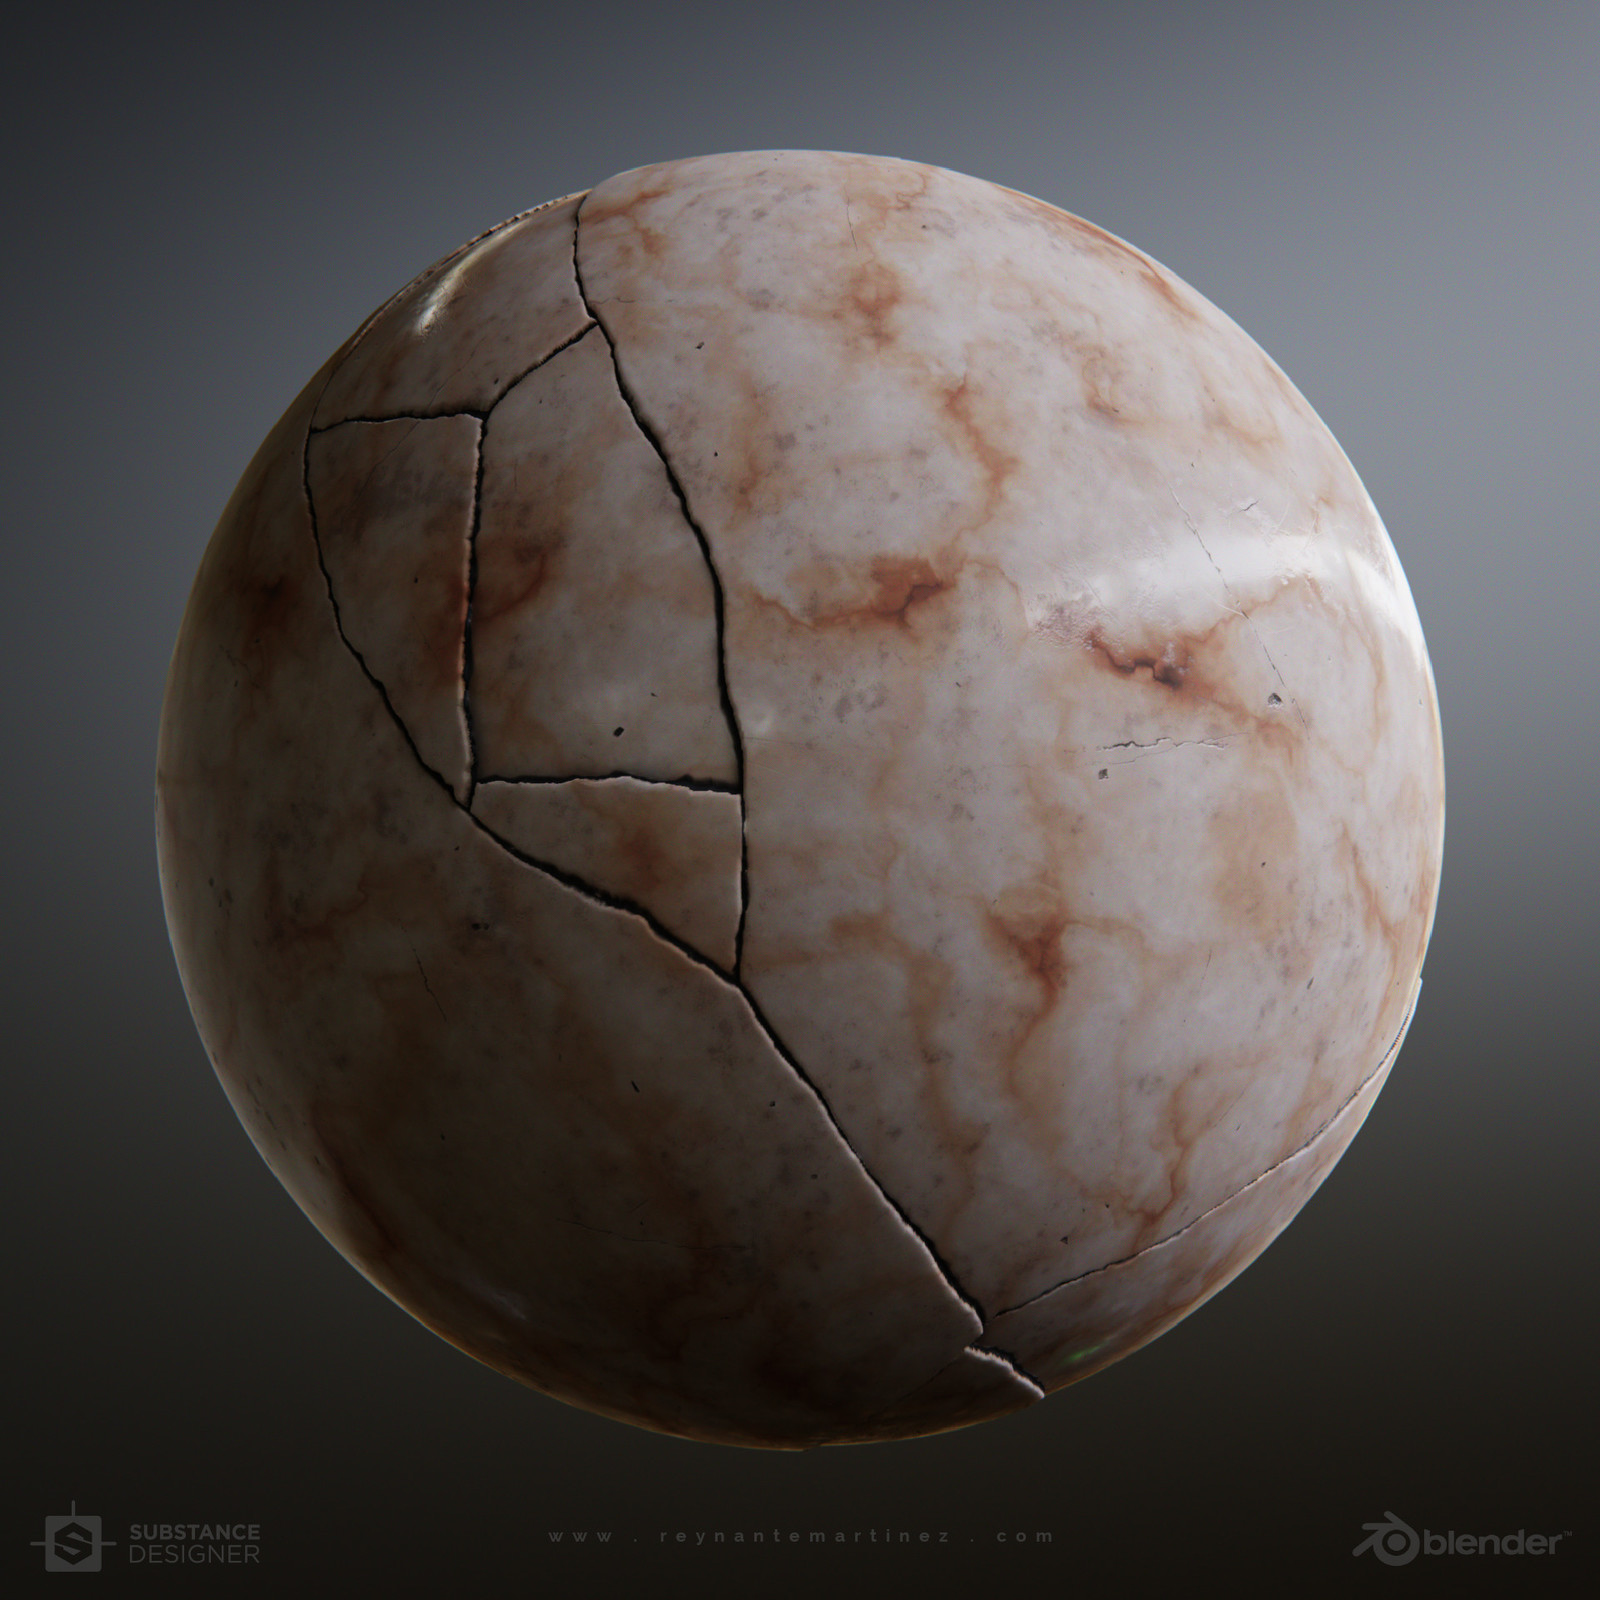 Marble Material Study